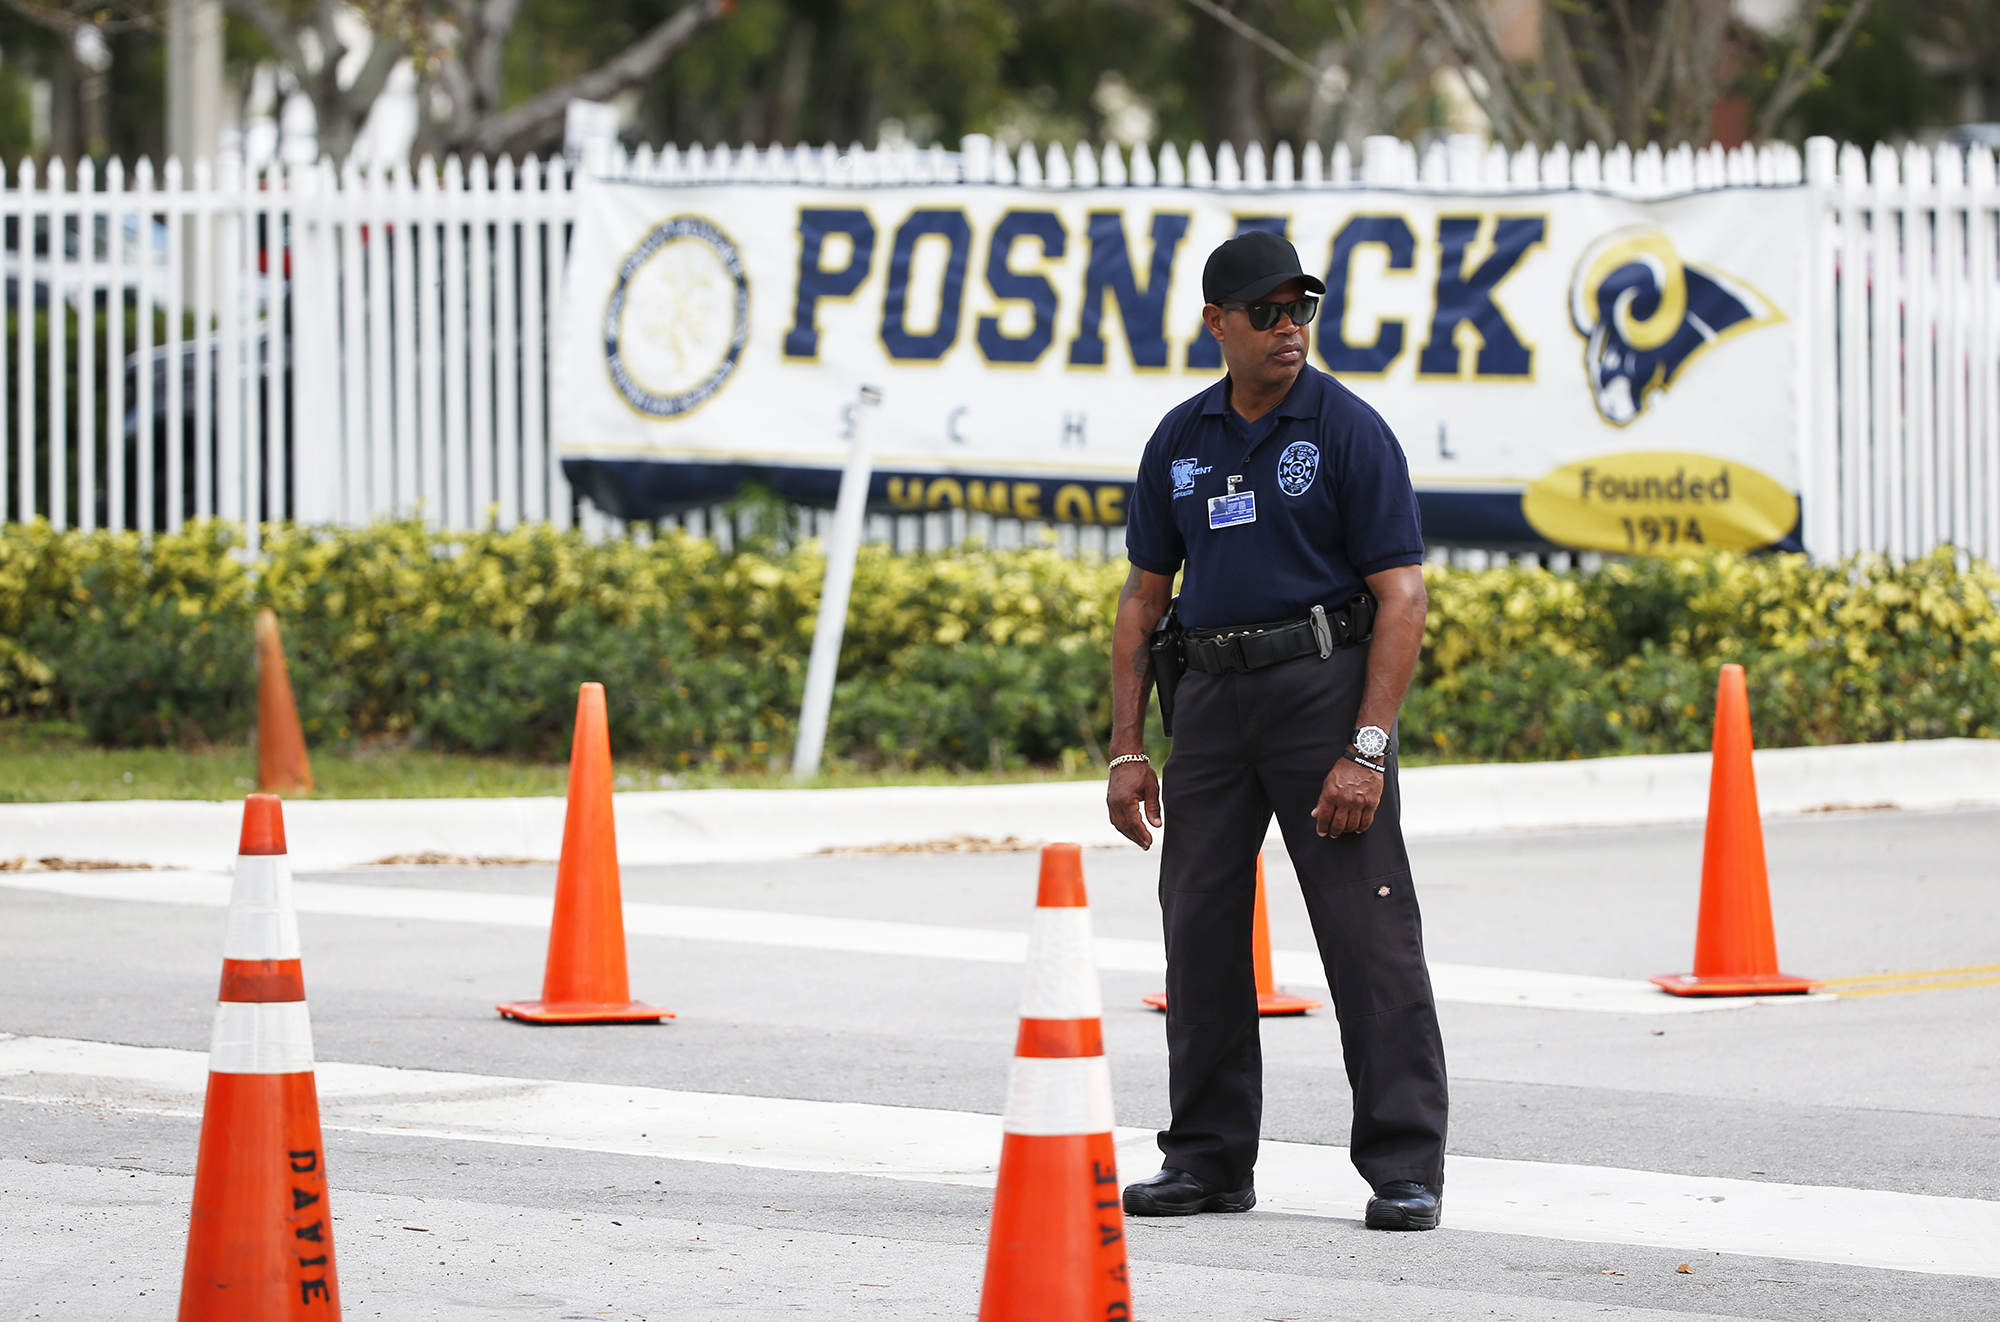 A security guard stands outside the entrance to the David Posnack Jewish Community Center and David Posnack Jewish Day School after people were evacuated because of a bomb threat, on Feb. 27, 2017, in Davie, Fla.